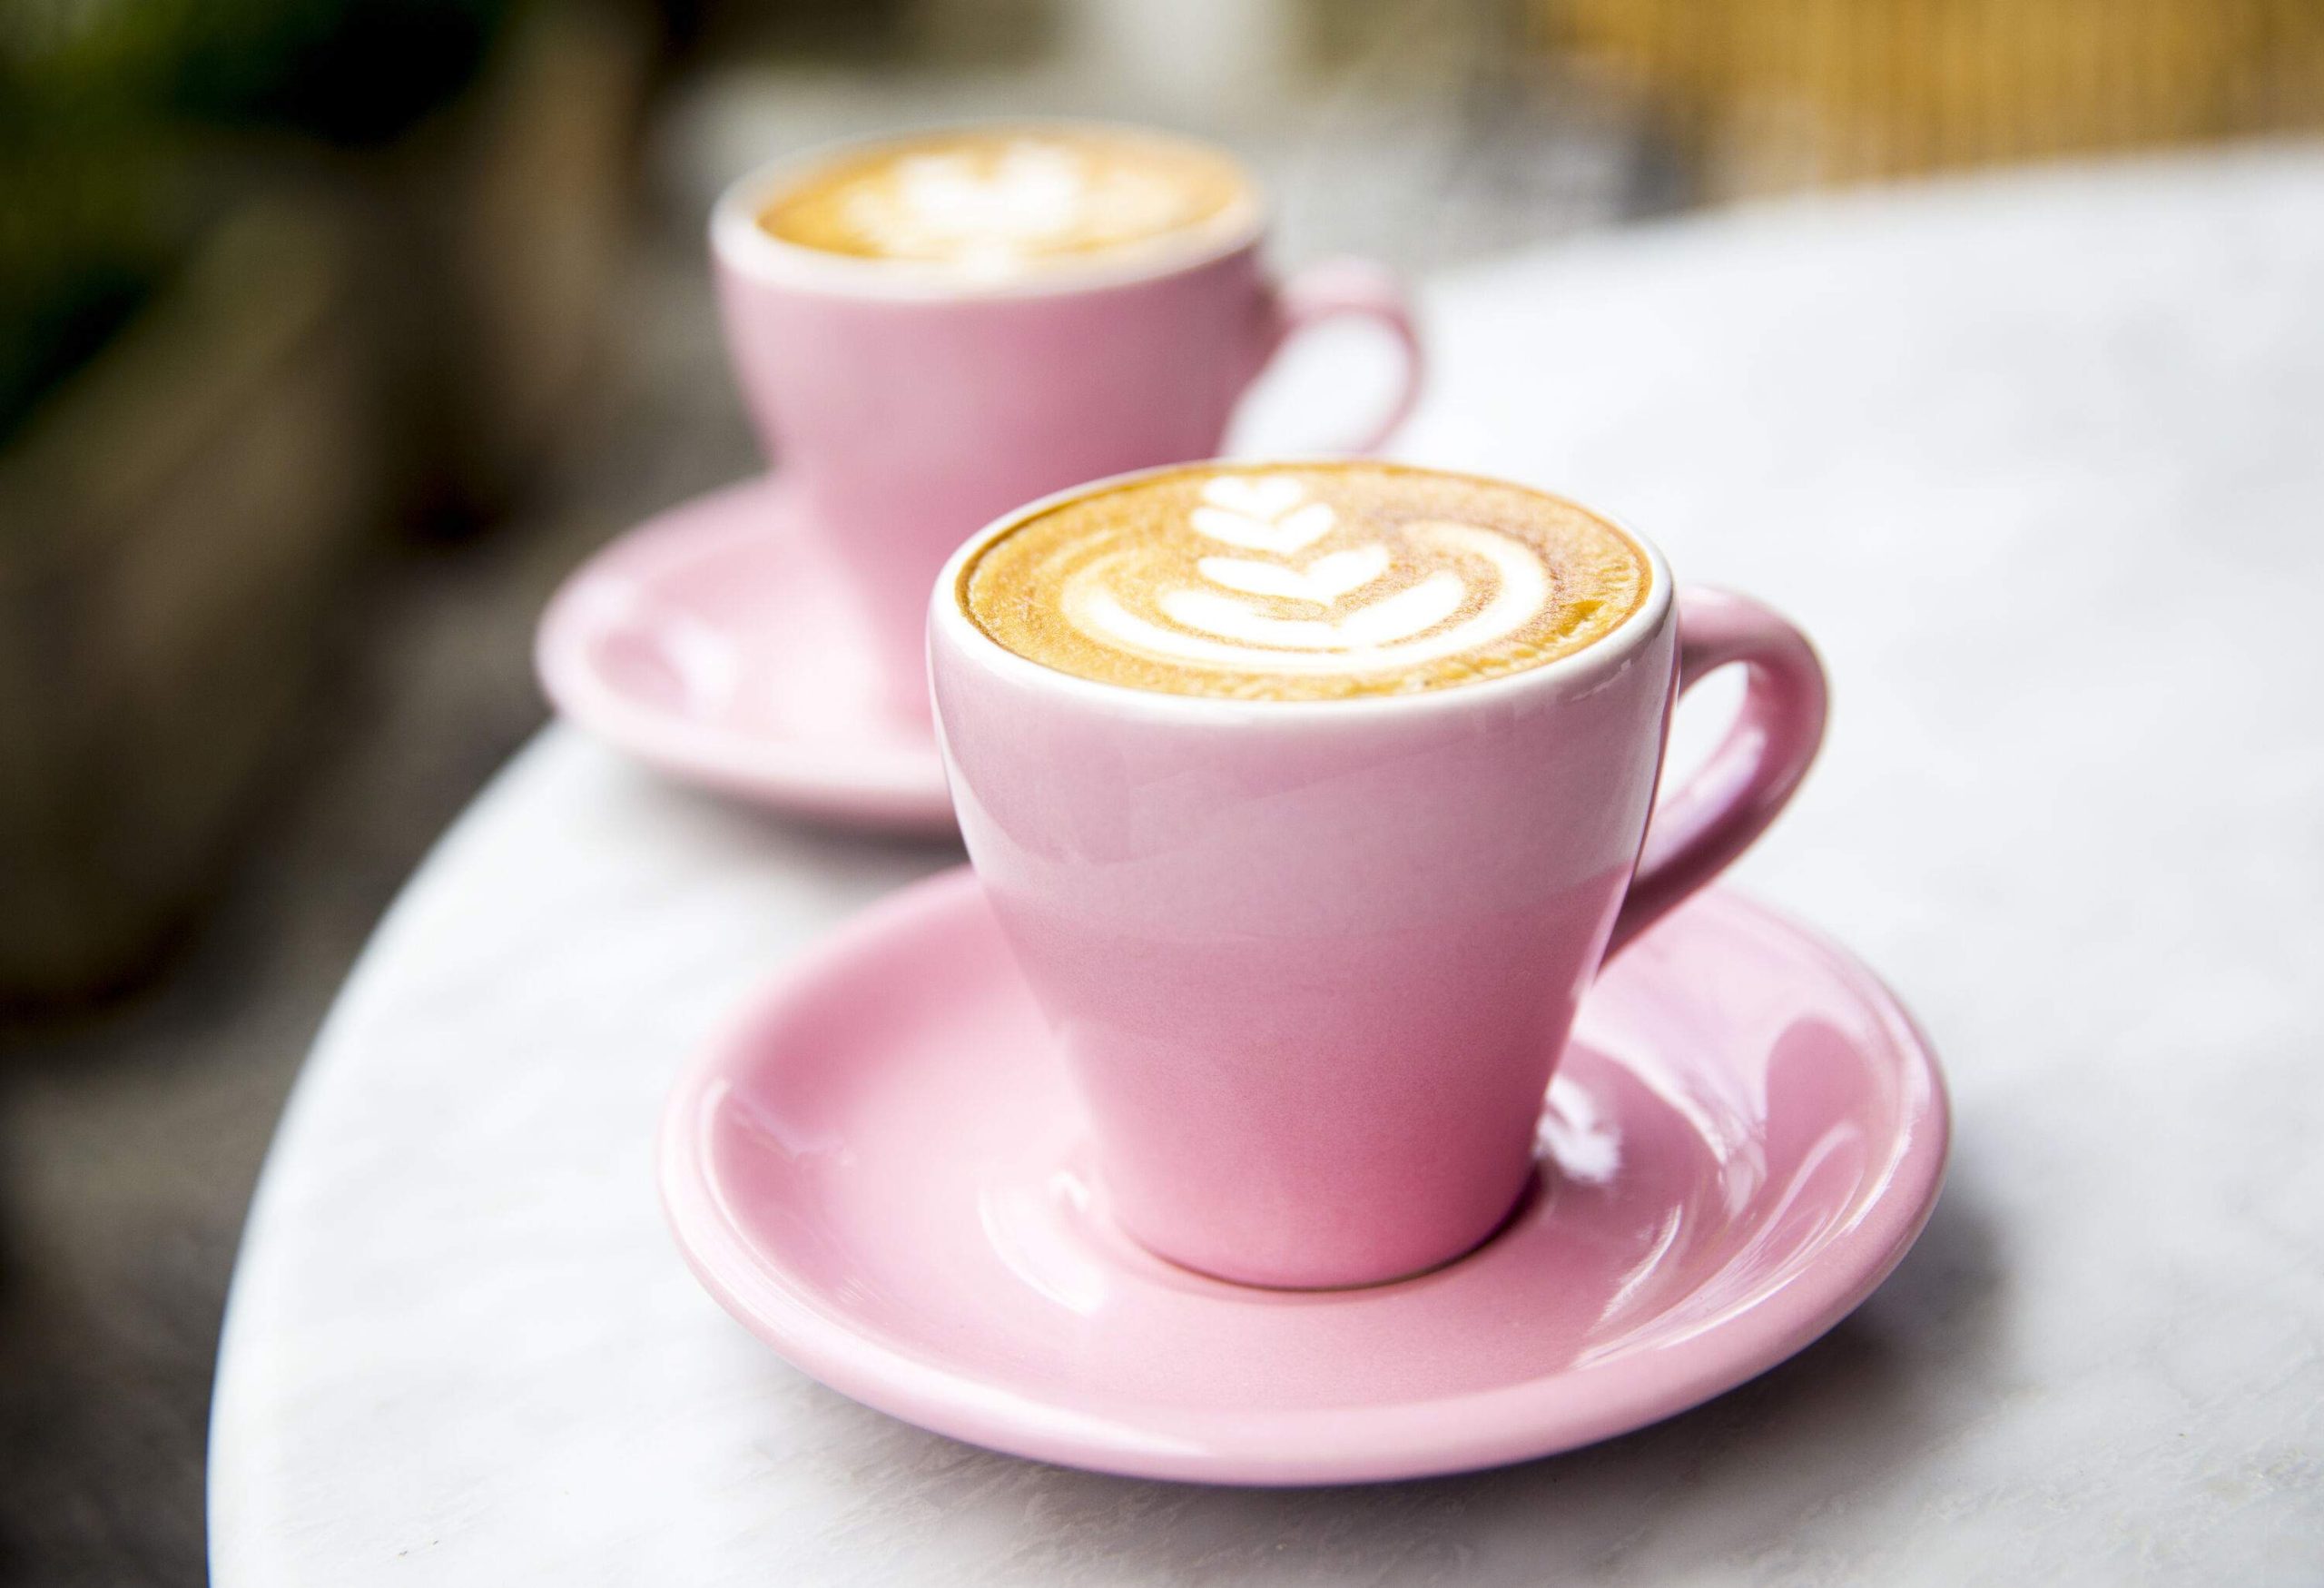 Two pink cups of coffee with a leaf-shaped design were placed on a table.